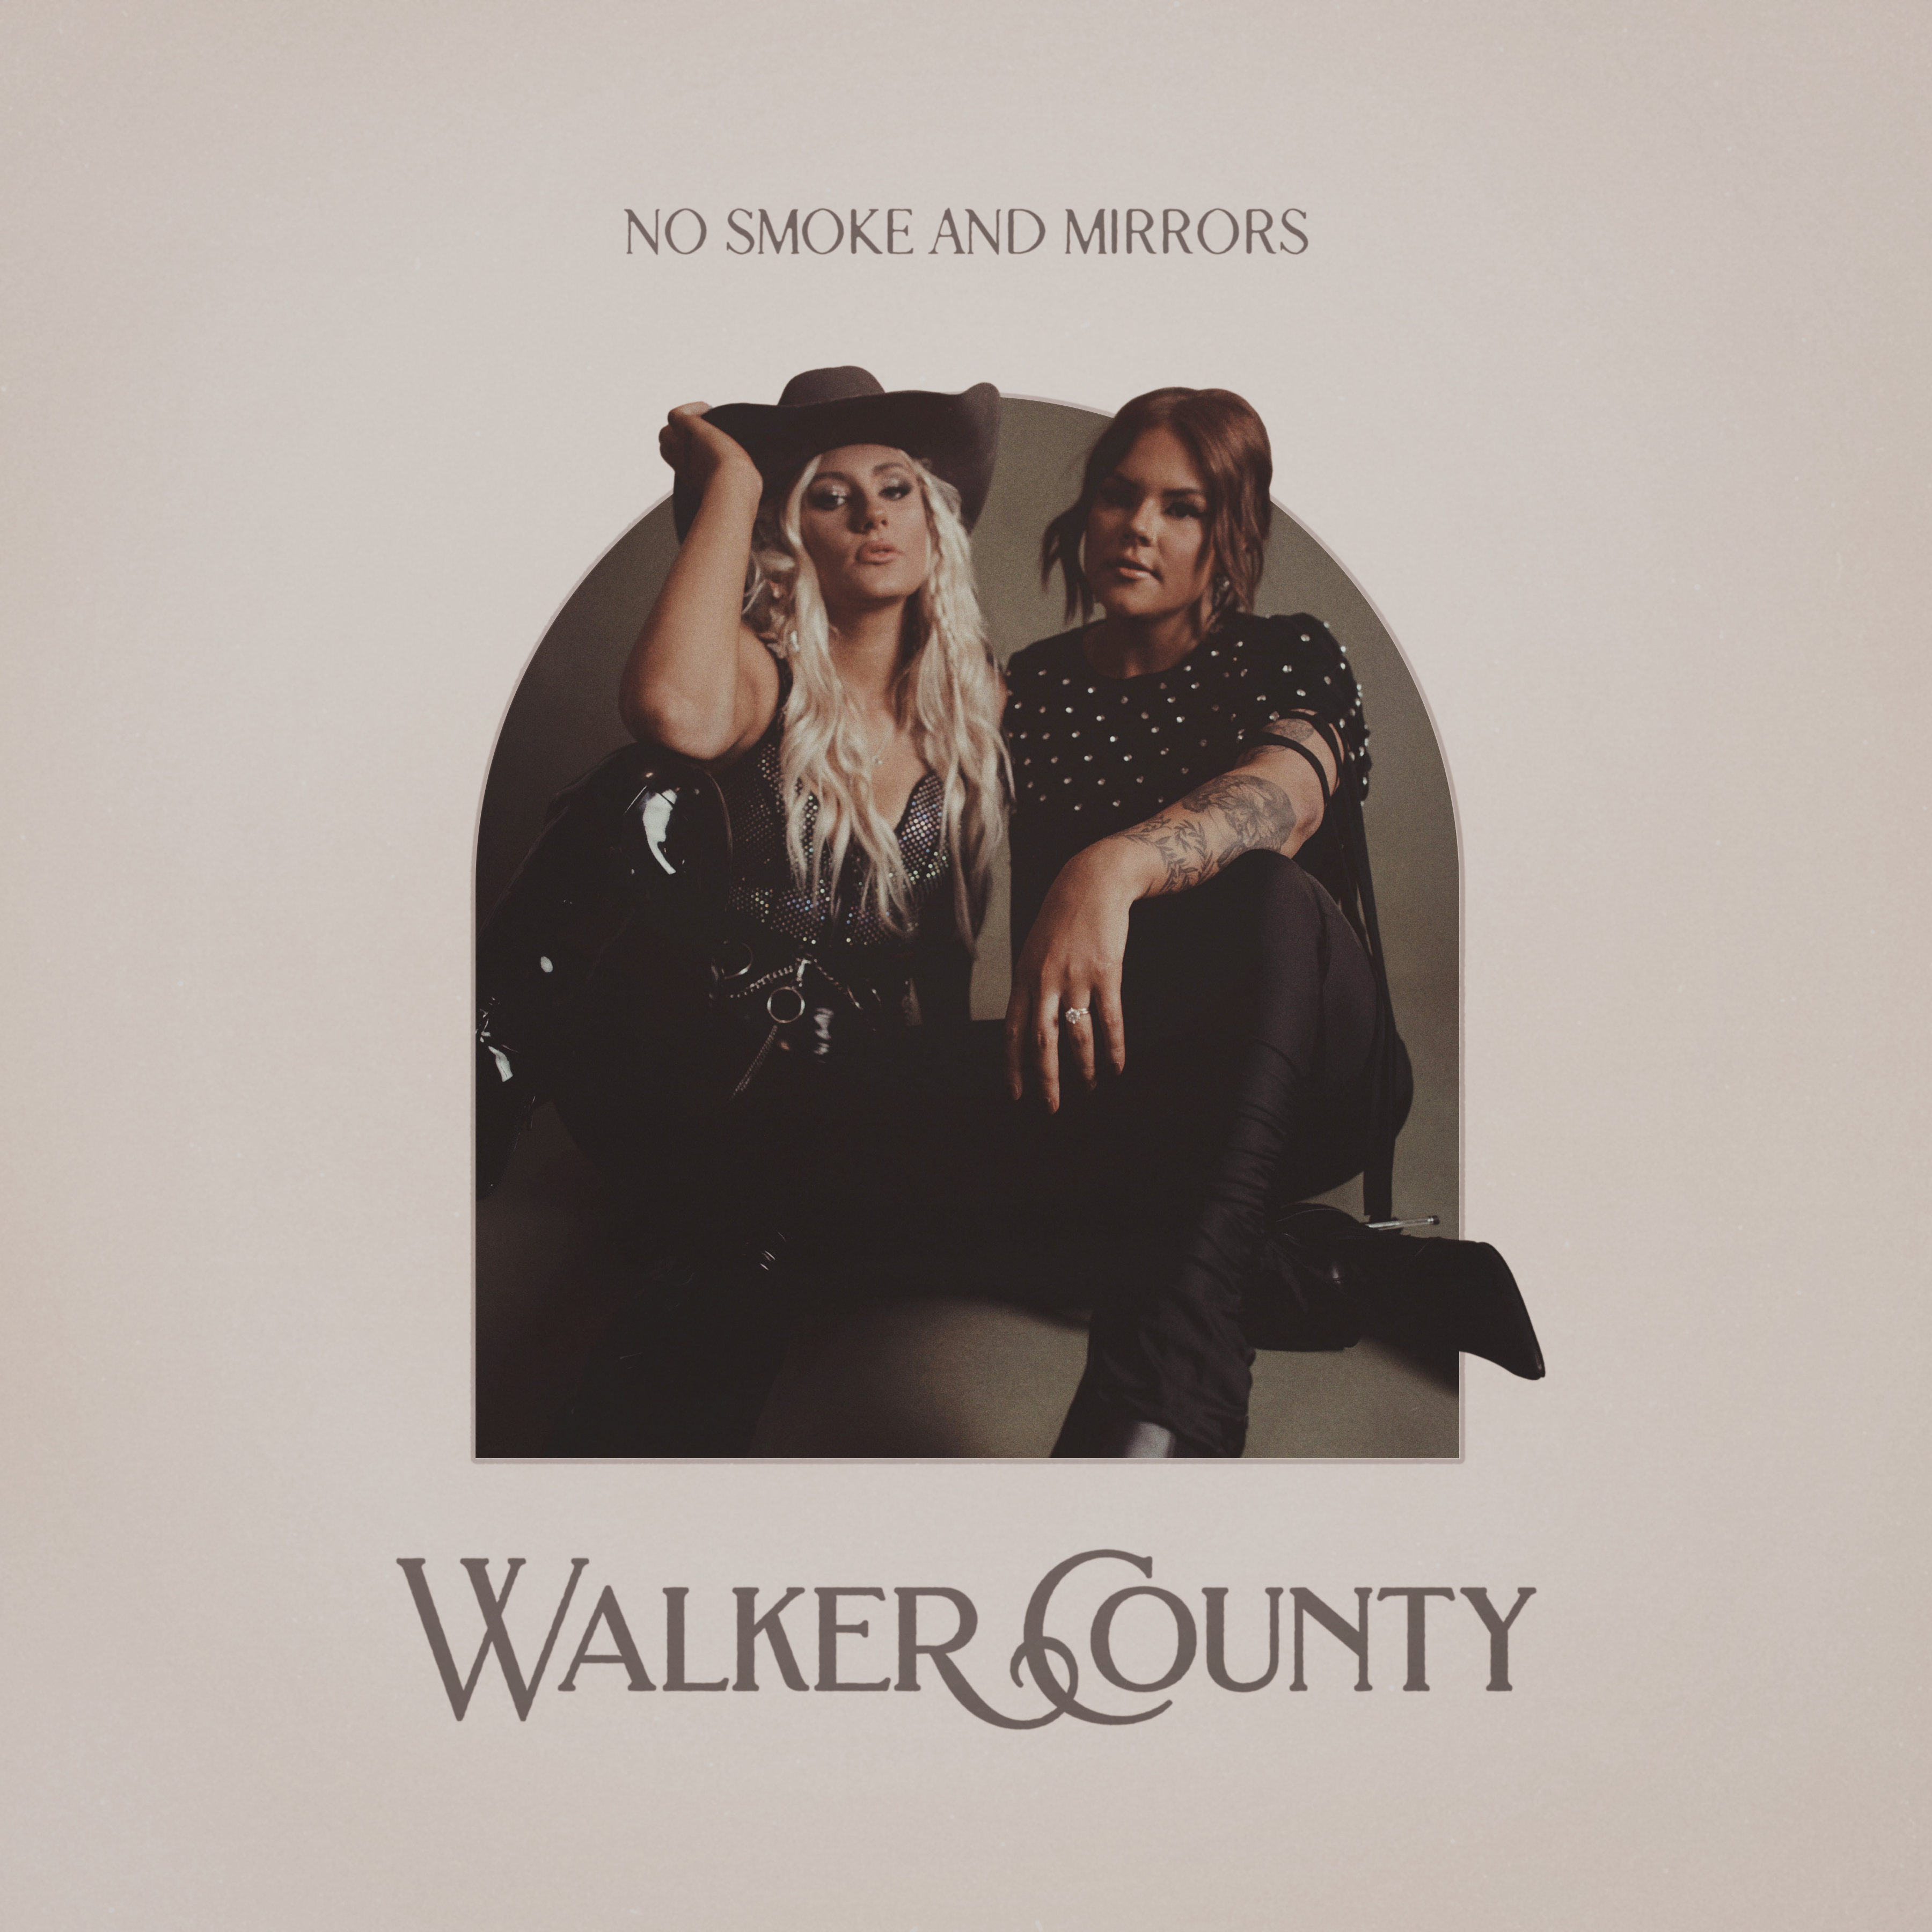 NO SMOKE AND MIRRORS FOR WALKER COUNTY: WARNER MUSIC NASHVILLE ANOUNCES DEBUT EP, DUE FEBRUARY 10